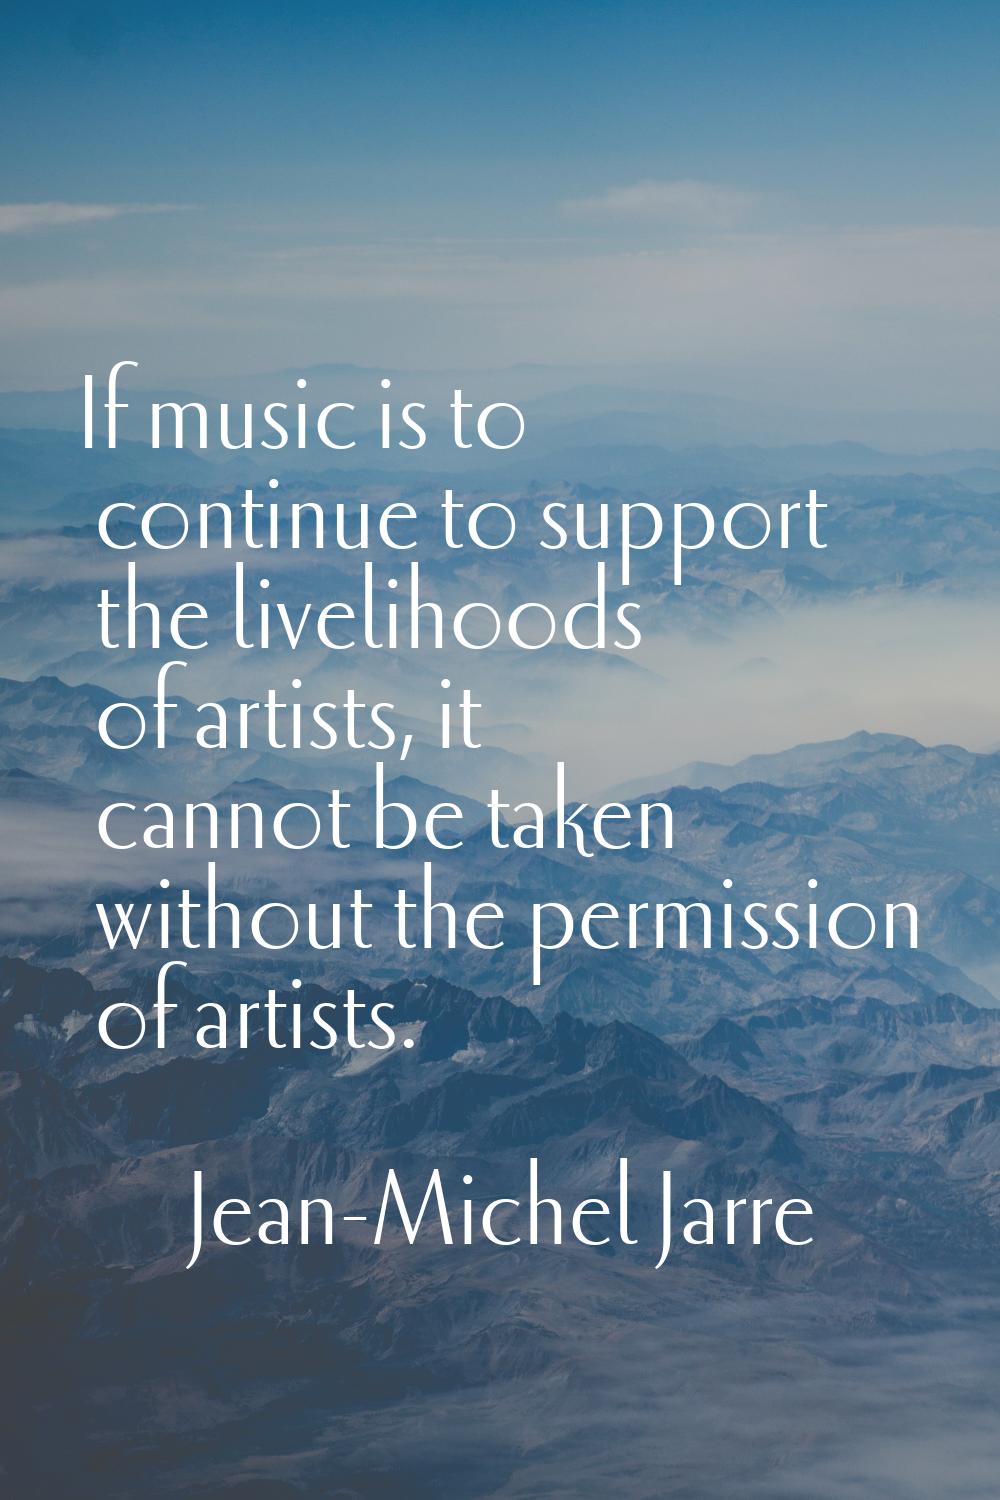 If music is to continue to support the livelihoods of artists, it cannot be taken without the permi